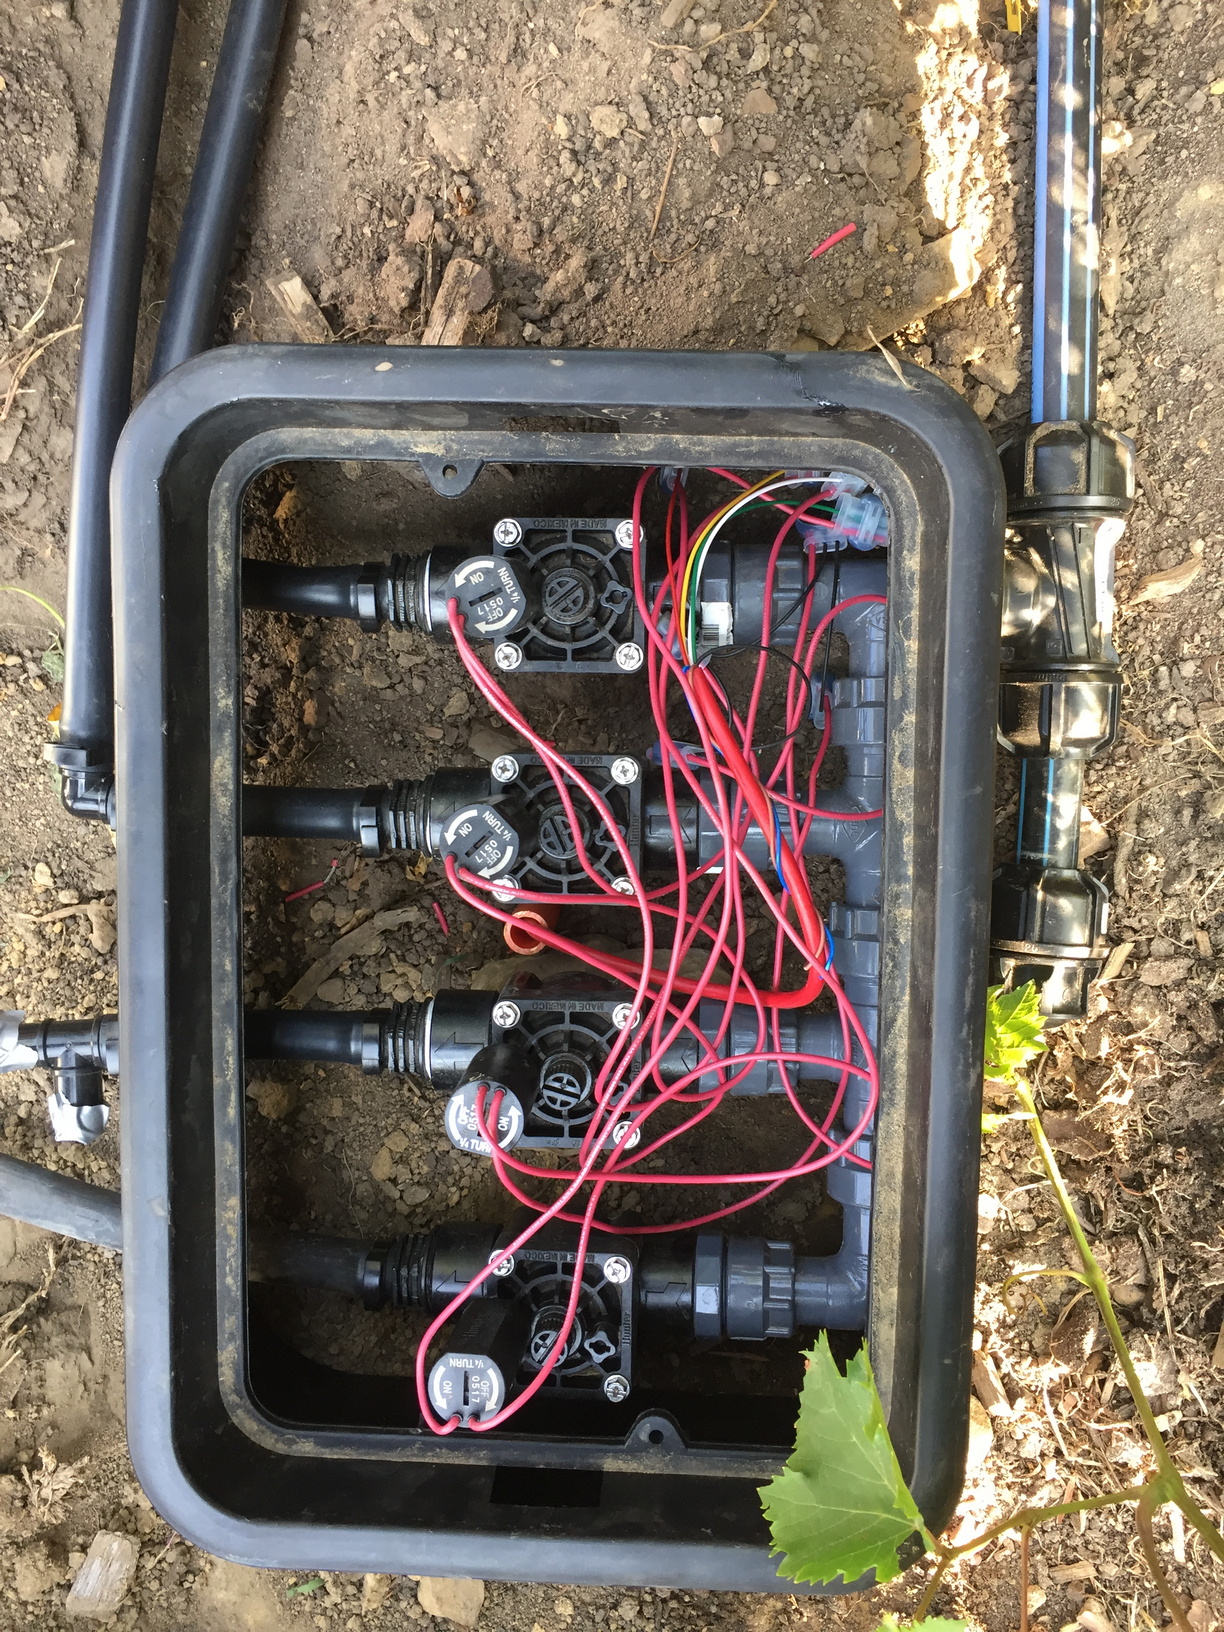 Solenoid valve box fully loaded with 4 valve manifold and connected to low-density 19mm poly-pipe. The supply from the rainwater tanks has an end-cap installed on the other side of the T connector.